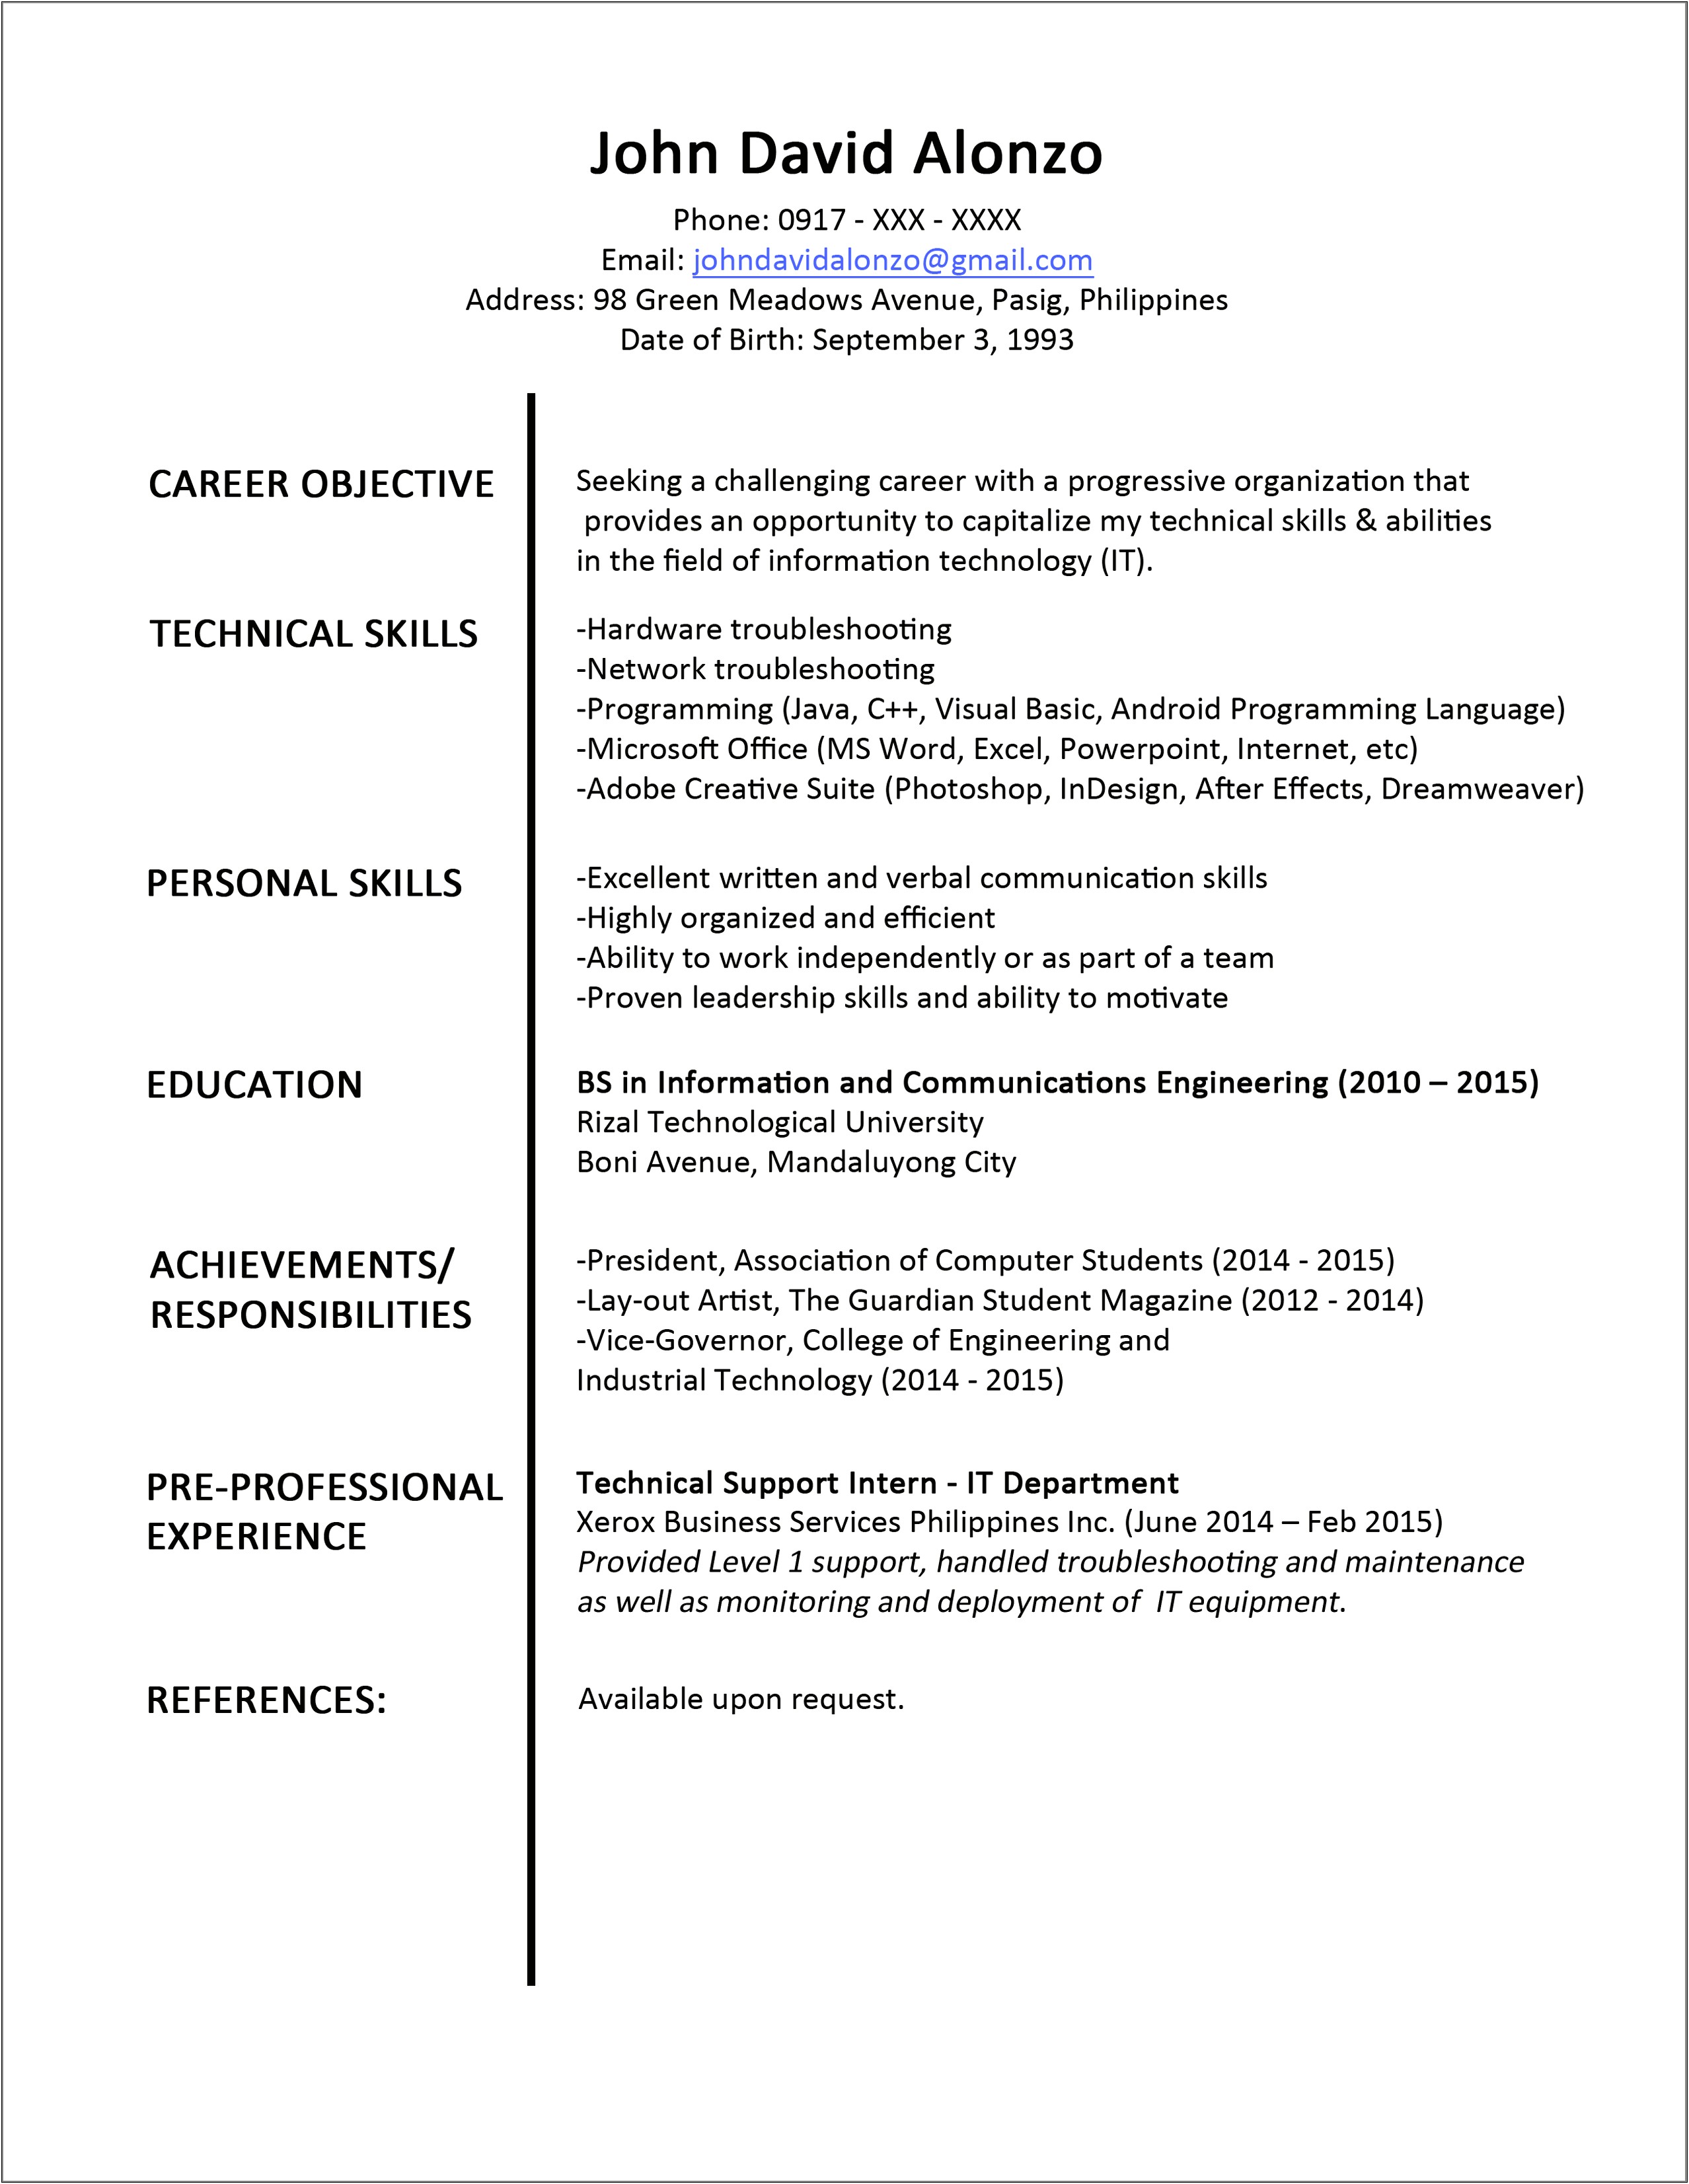 Resume With Only One Jobs